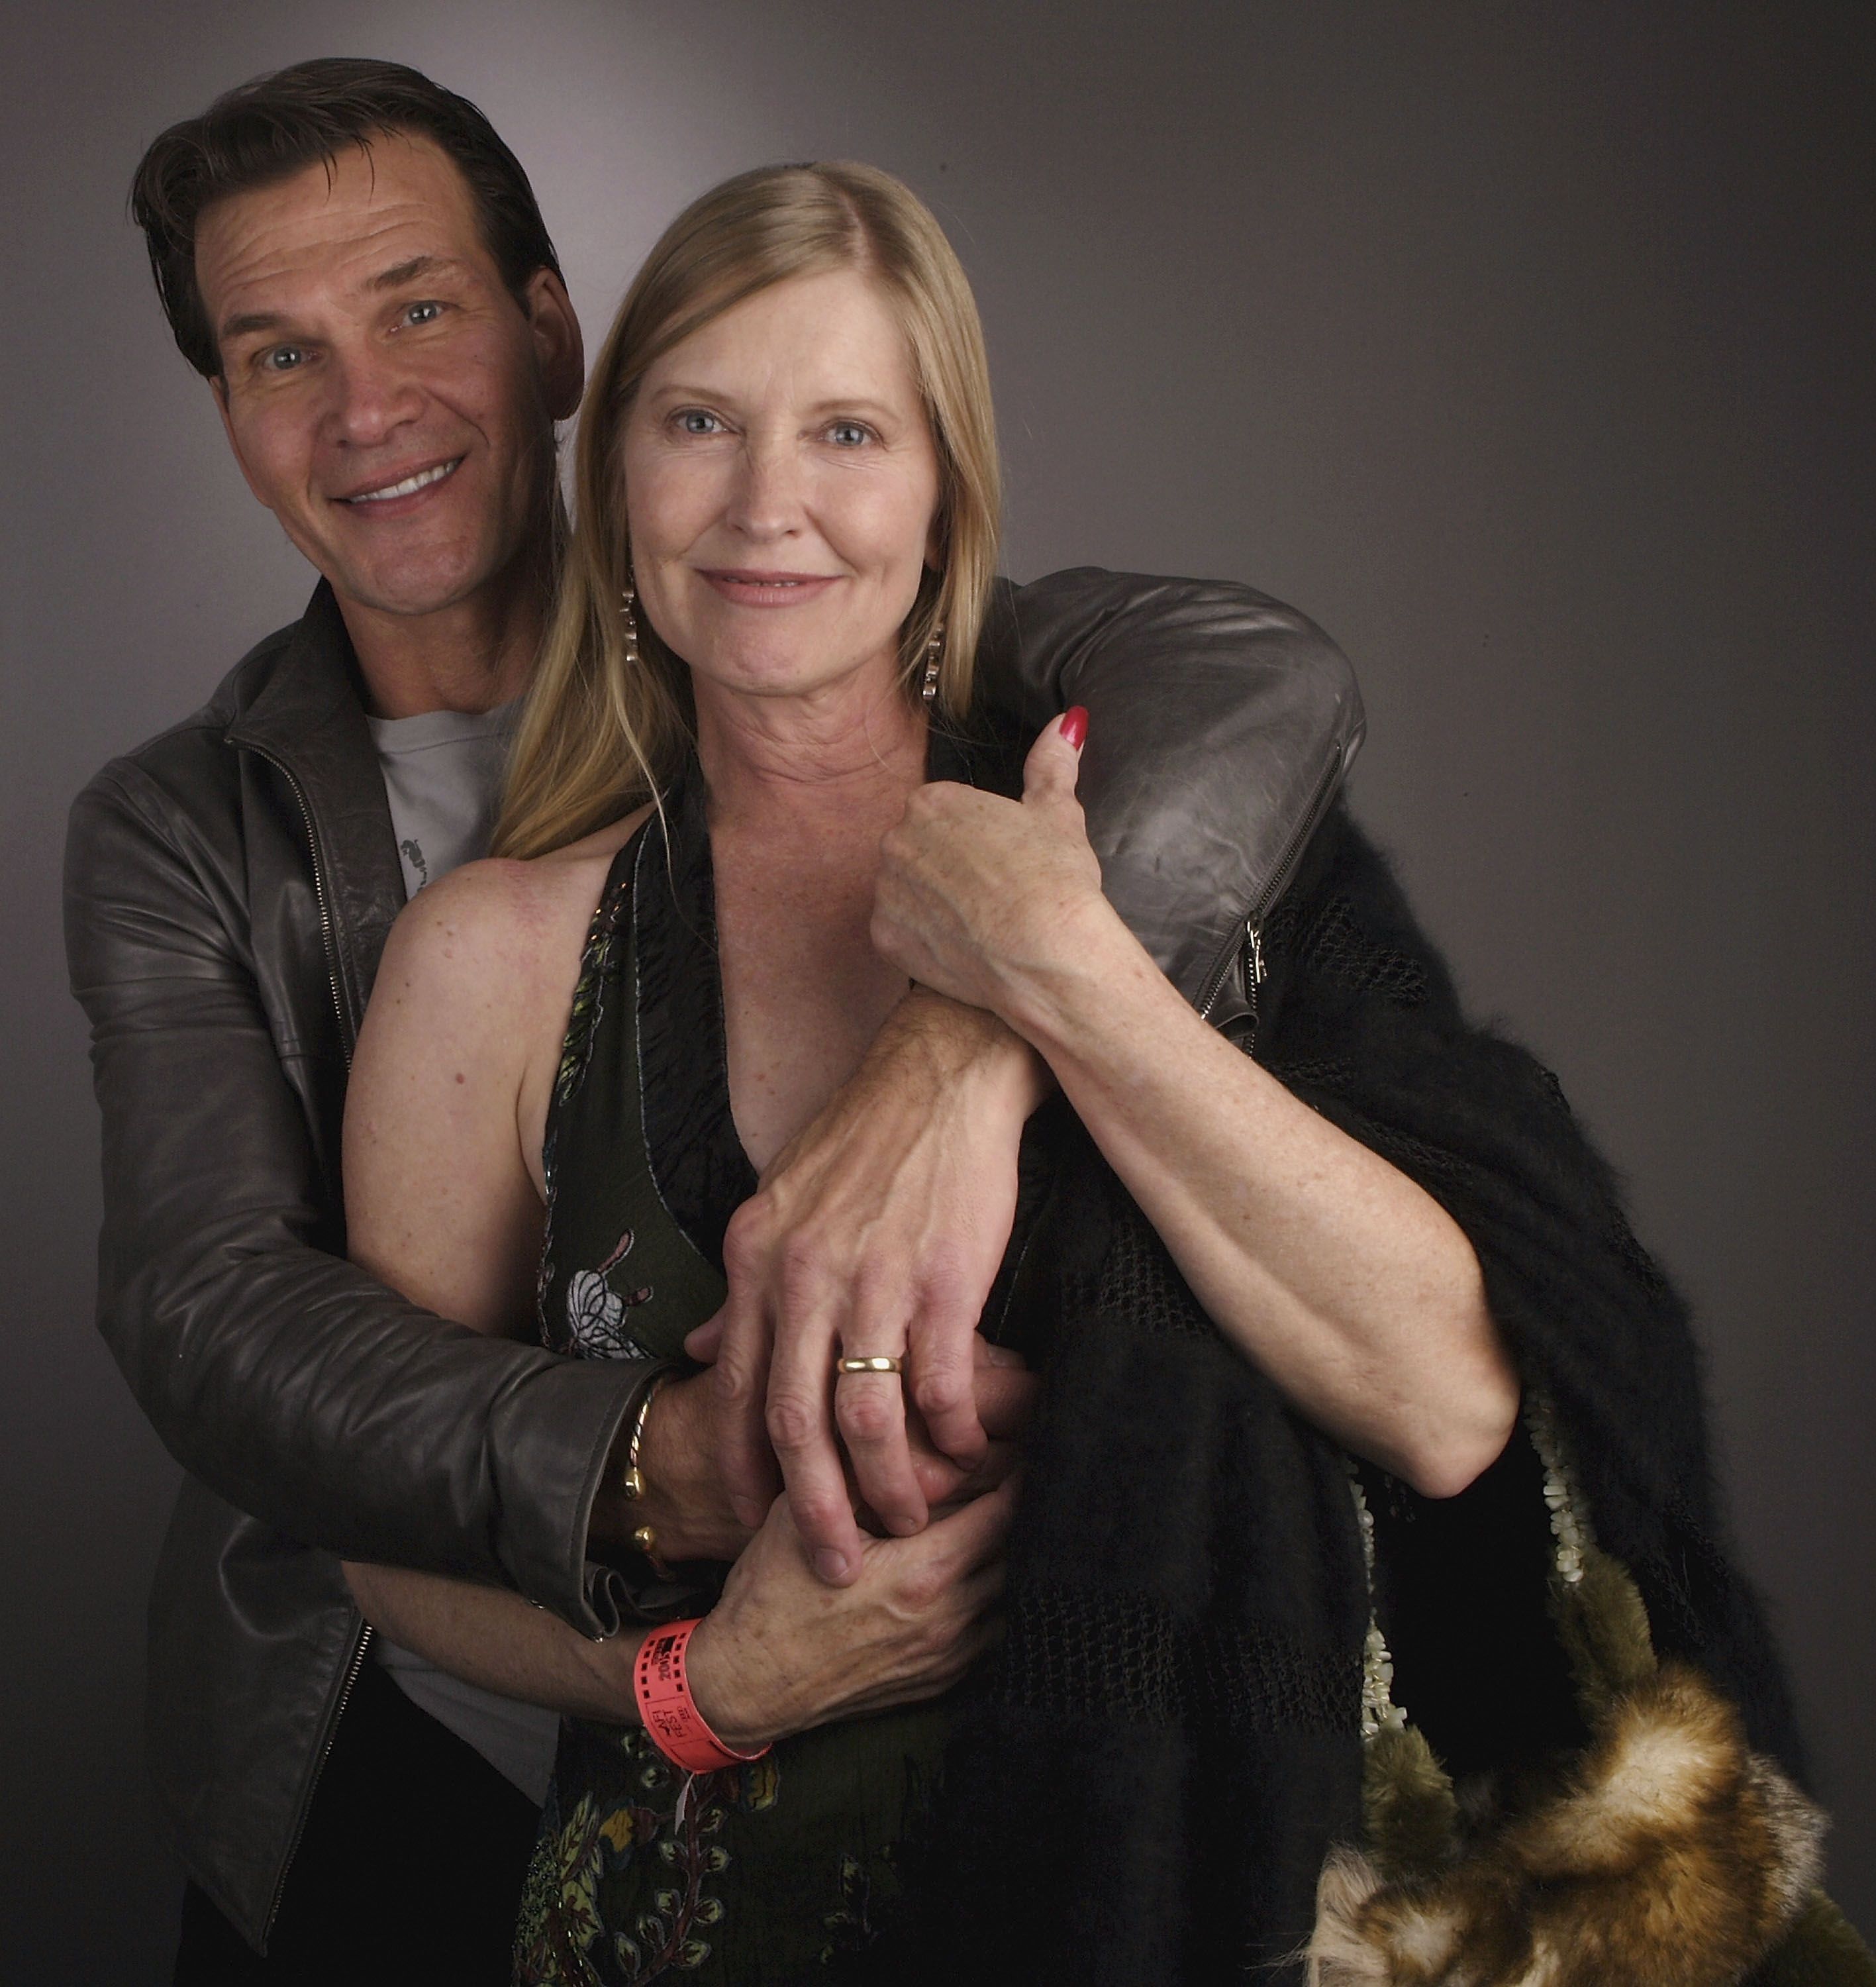 Patrick Swayze and his wife Lisa Niemi pose at the Portrait Studio during the AFI Fest on November 5, 2005, in Hollywood, California | Photo: Getty Images